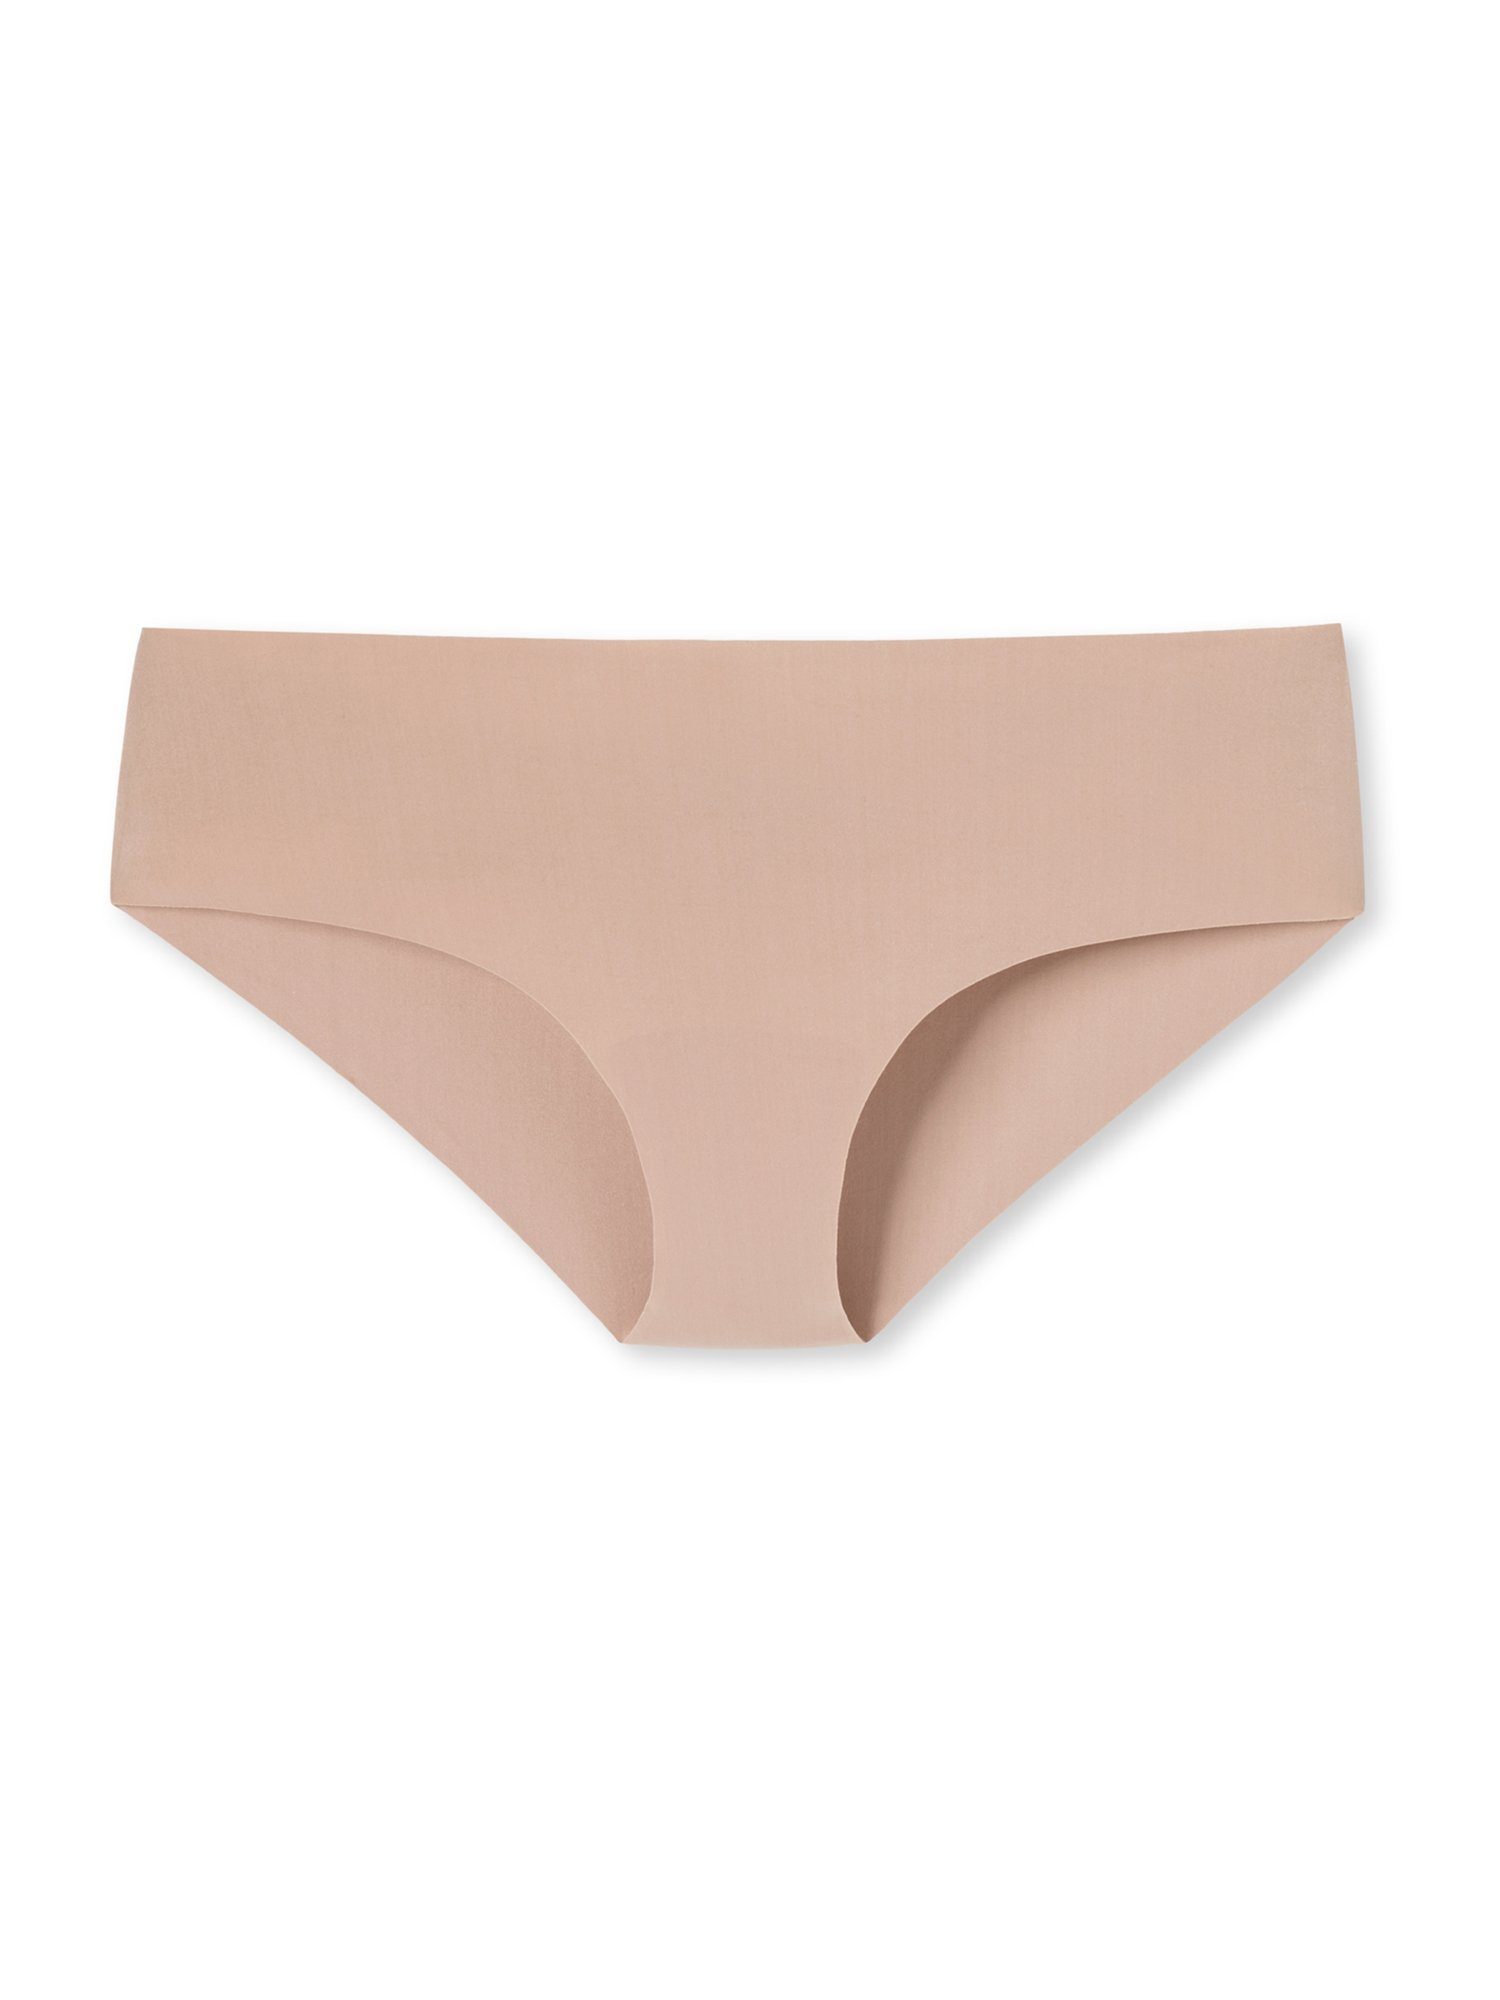 maple Schiesser Invisible Panty Light